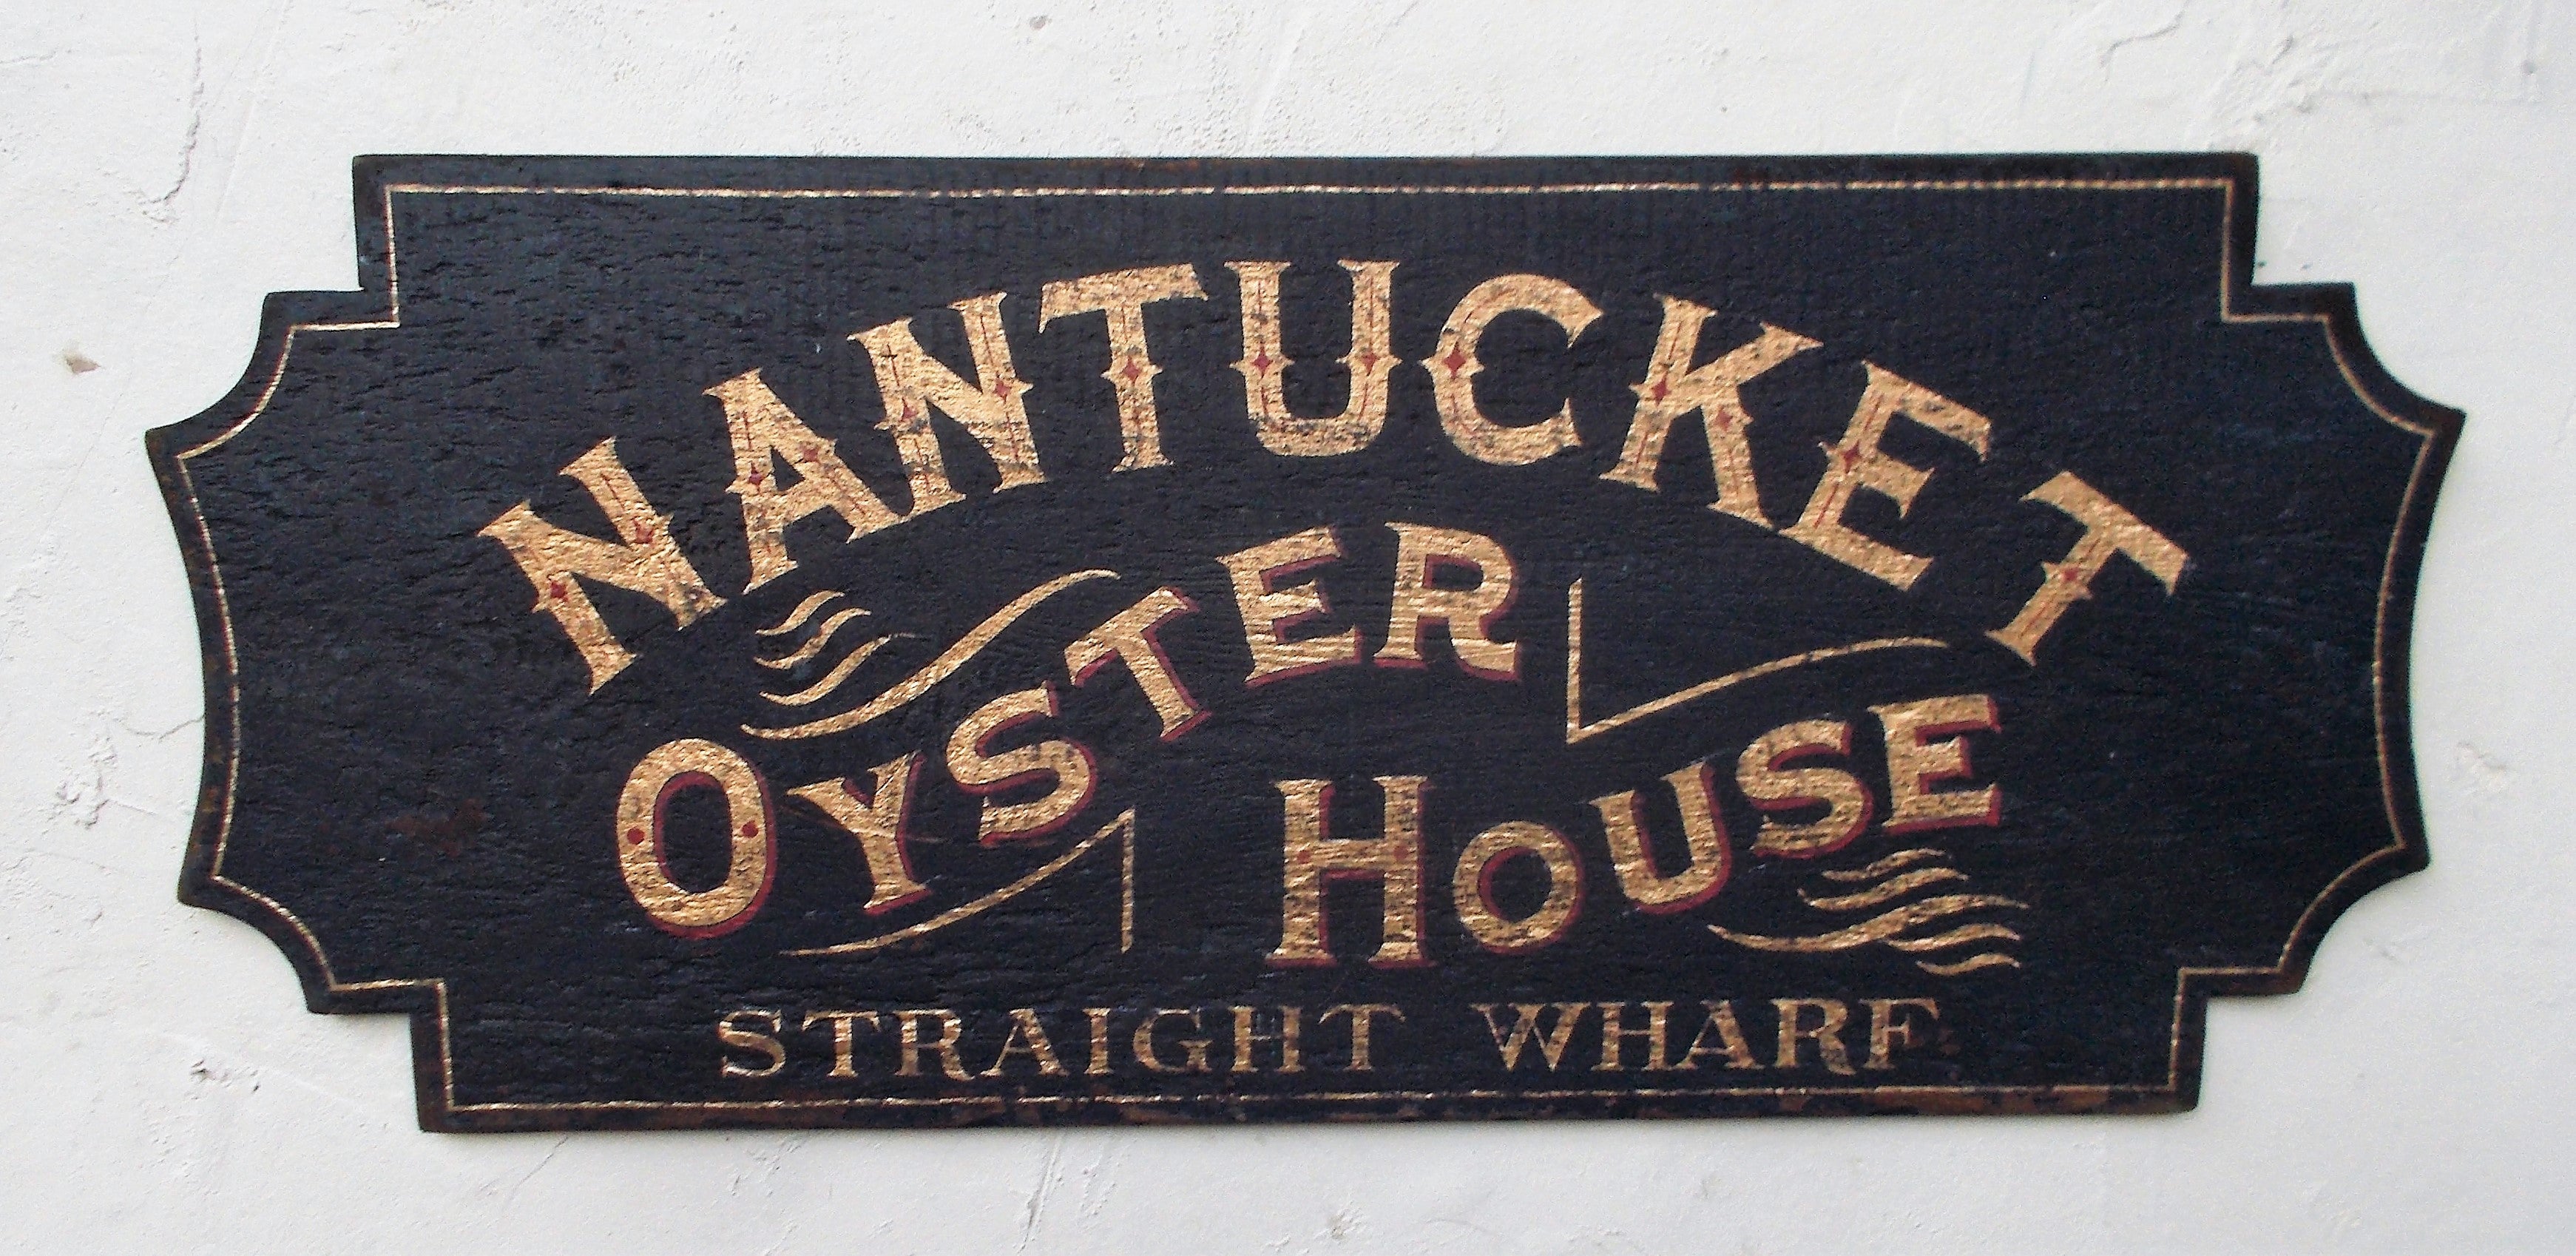 Nantucket Oyster House